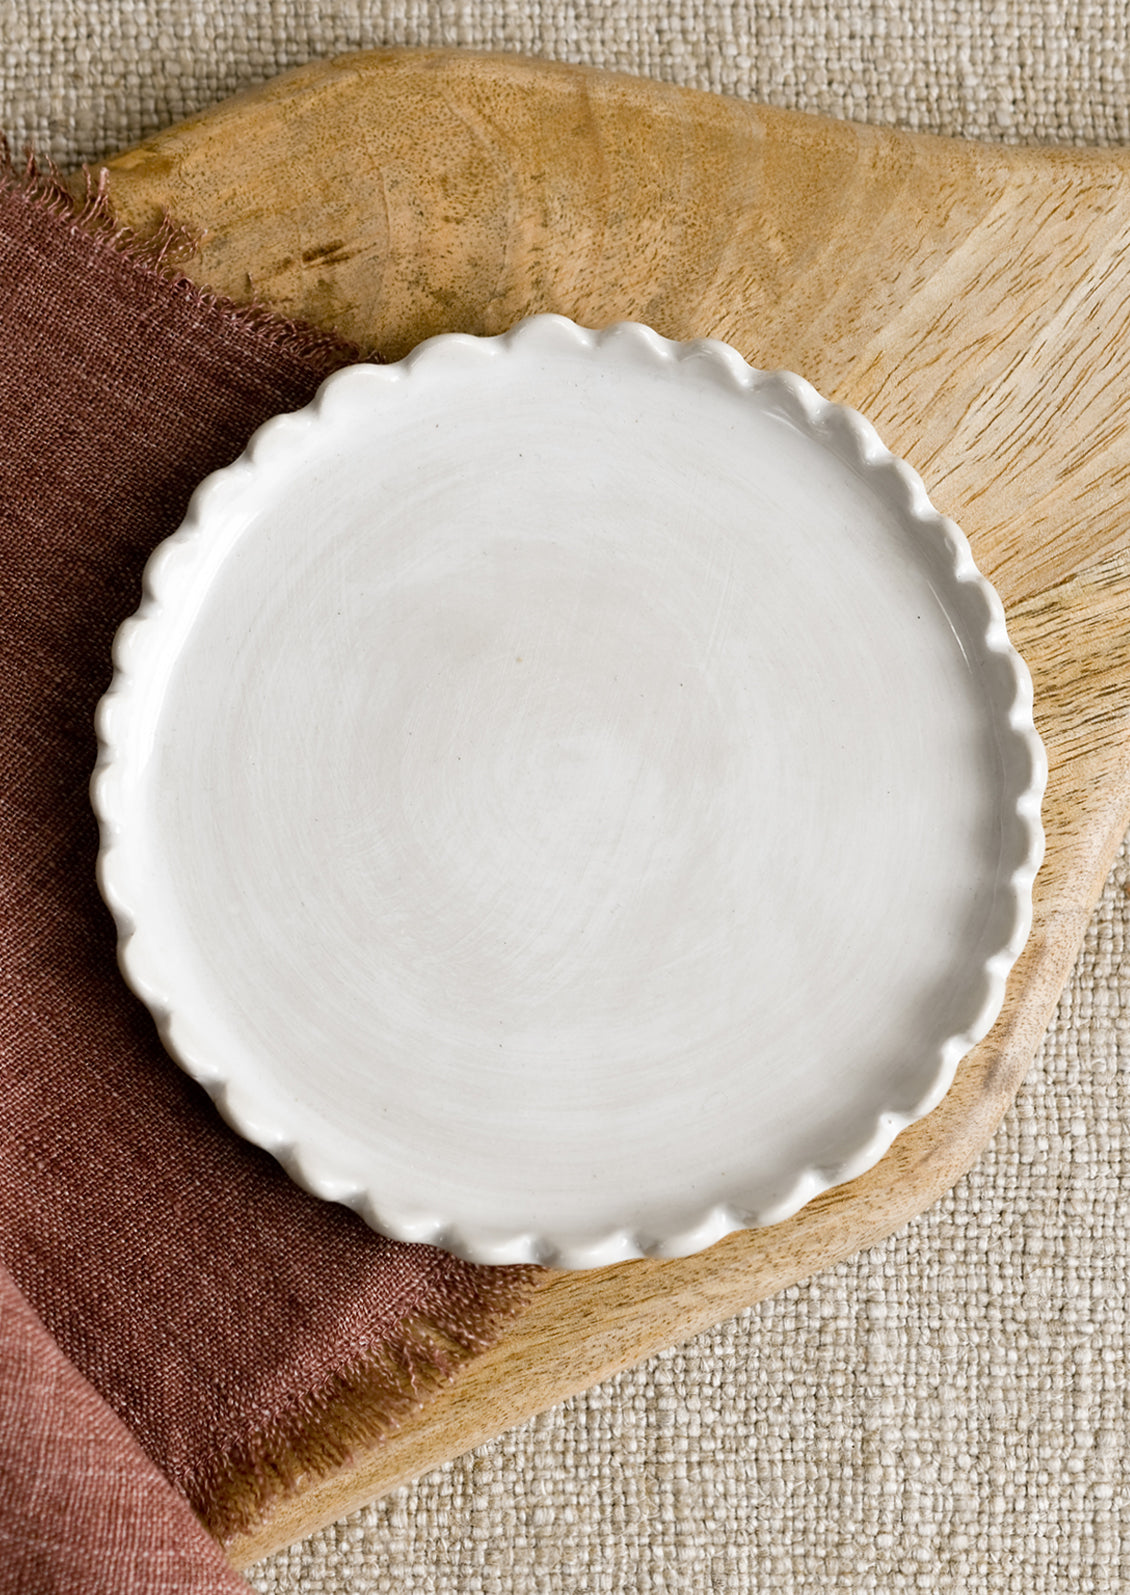 A round ceramic plate in white with scalloped edges.